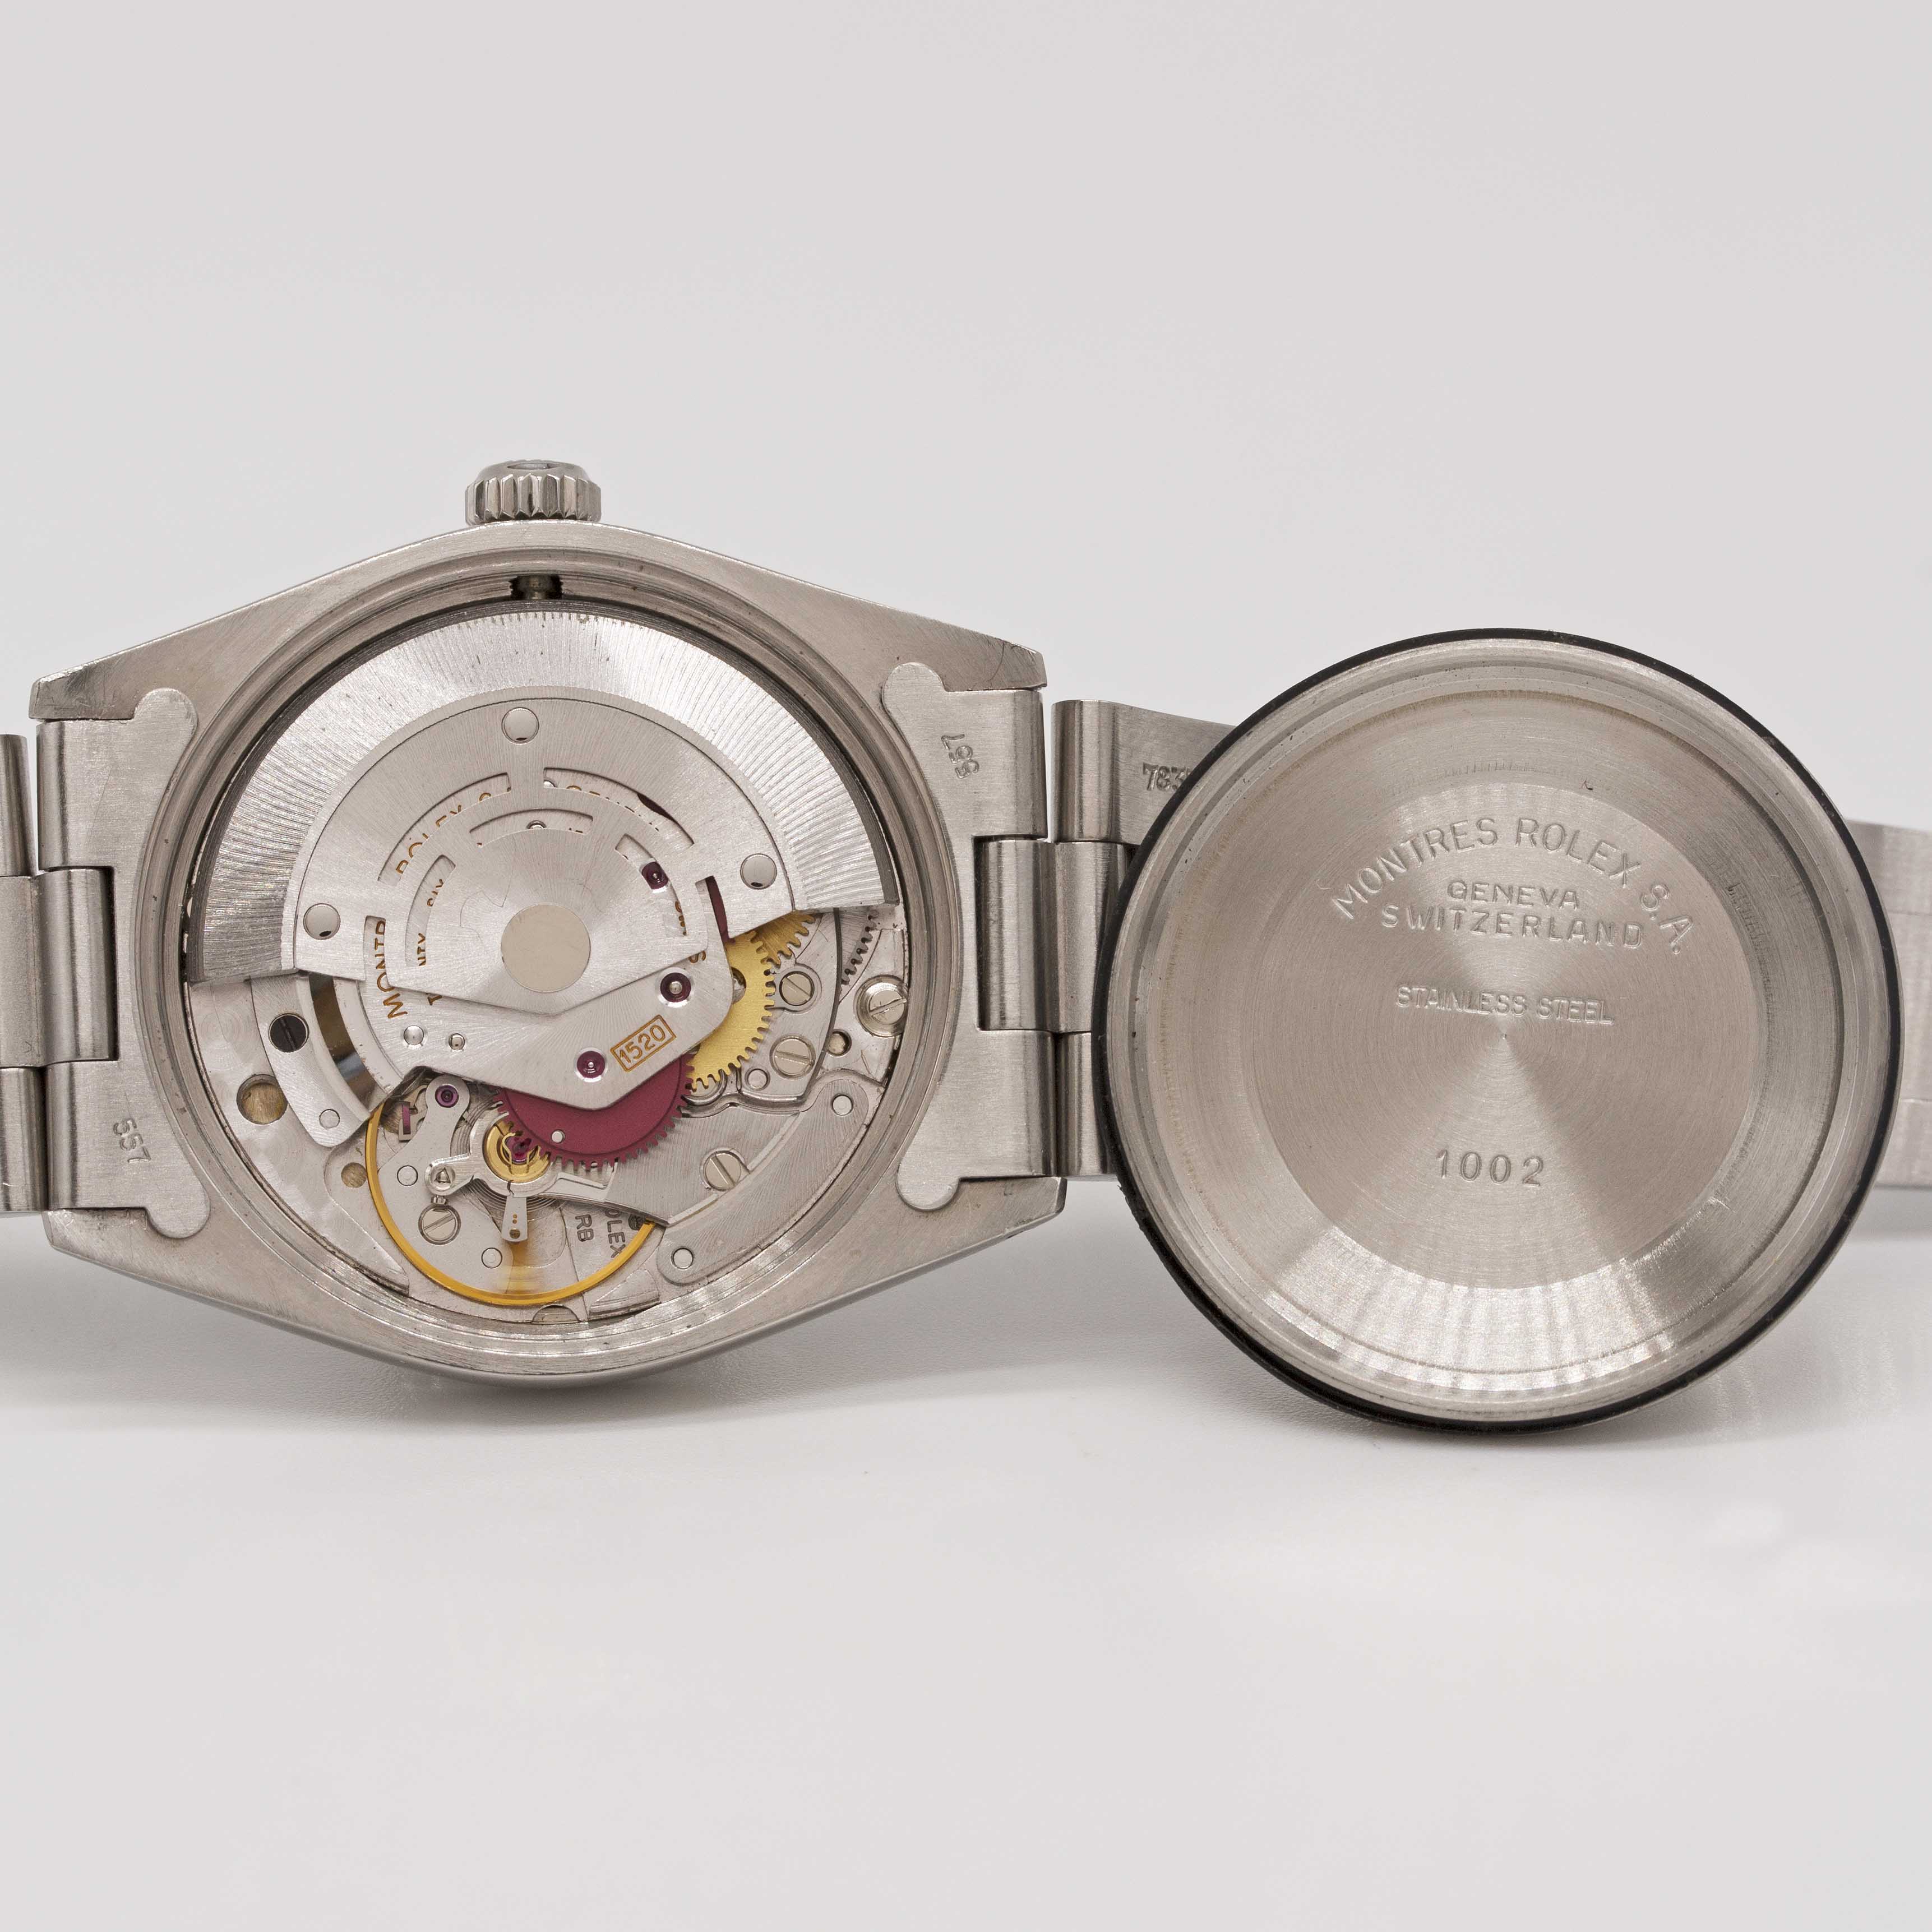 A RARE GENTLEMAN'S STAINLESS STEEL ROLEX OYSTER PERPETUAL AIR KING BRACELET WATCH CIRCA 1989, REF. - Image 9 of 11